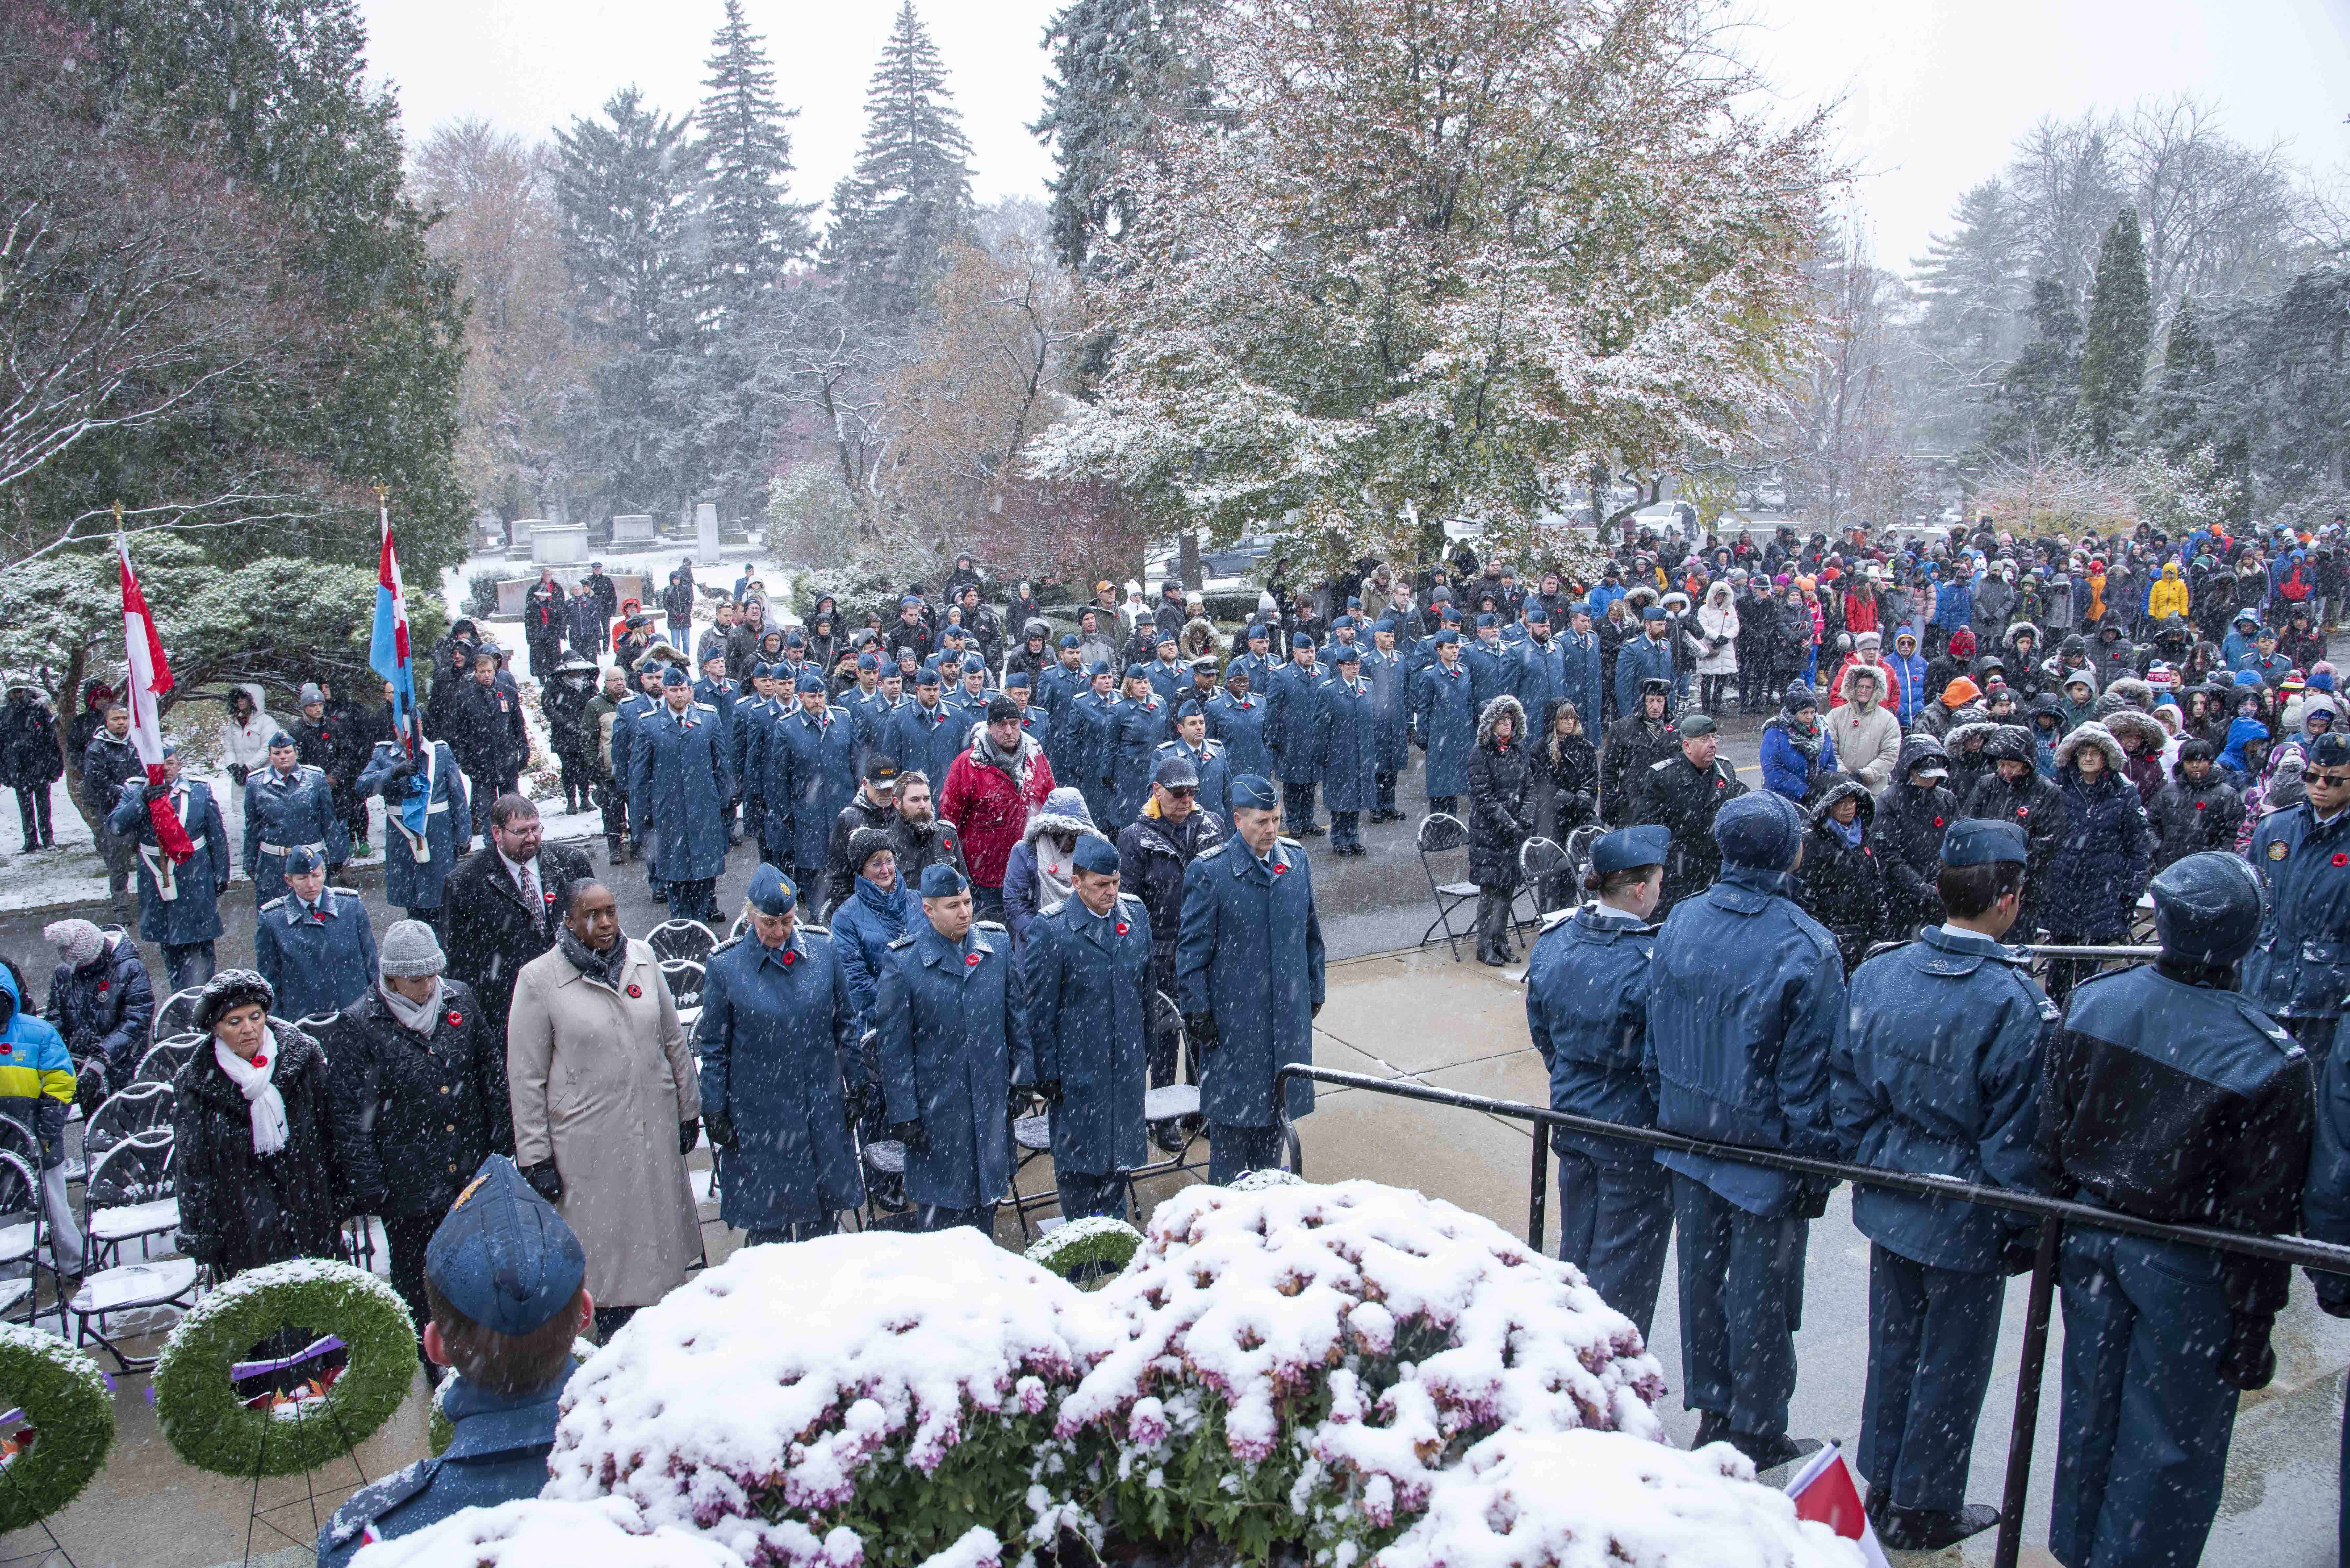 A large crowd of military personnel, veterans, youth and other members of the public stands in the falling snow during the 2019 Remembrance Day ceremony held at the mausoleum where Wing Commander William Barker, VC, is interred in Mount Pleasant Cemetery, Toronto. PHOTO: Corporal Lynette Ai Dang, BM10-2019-0359-026